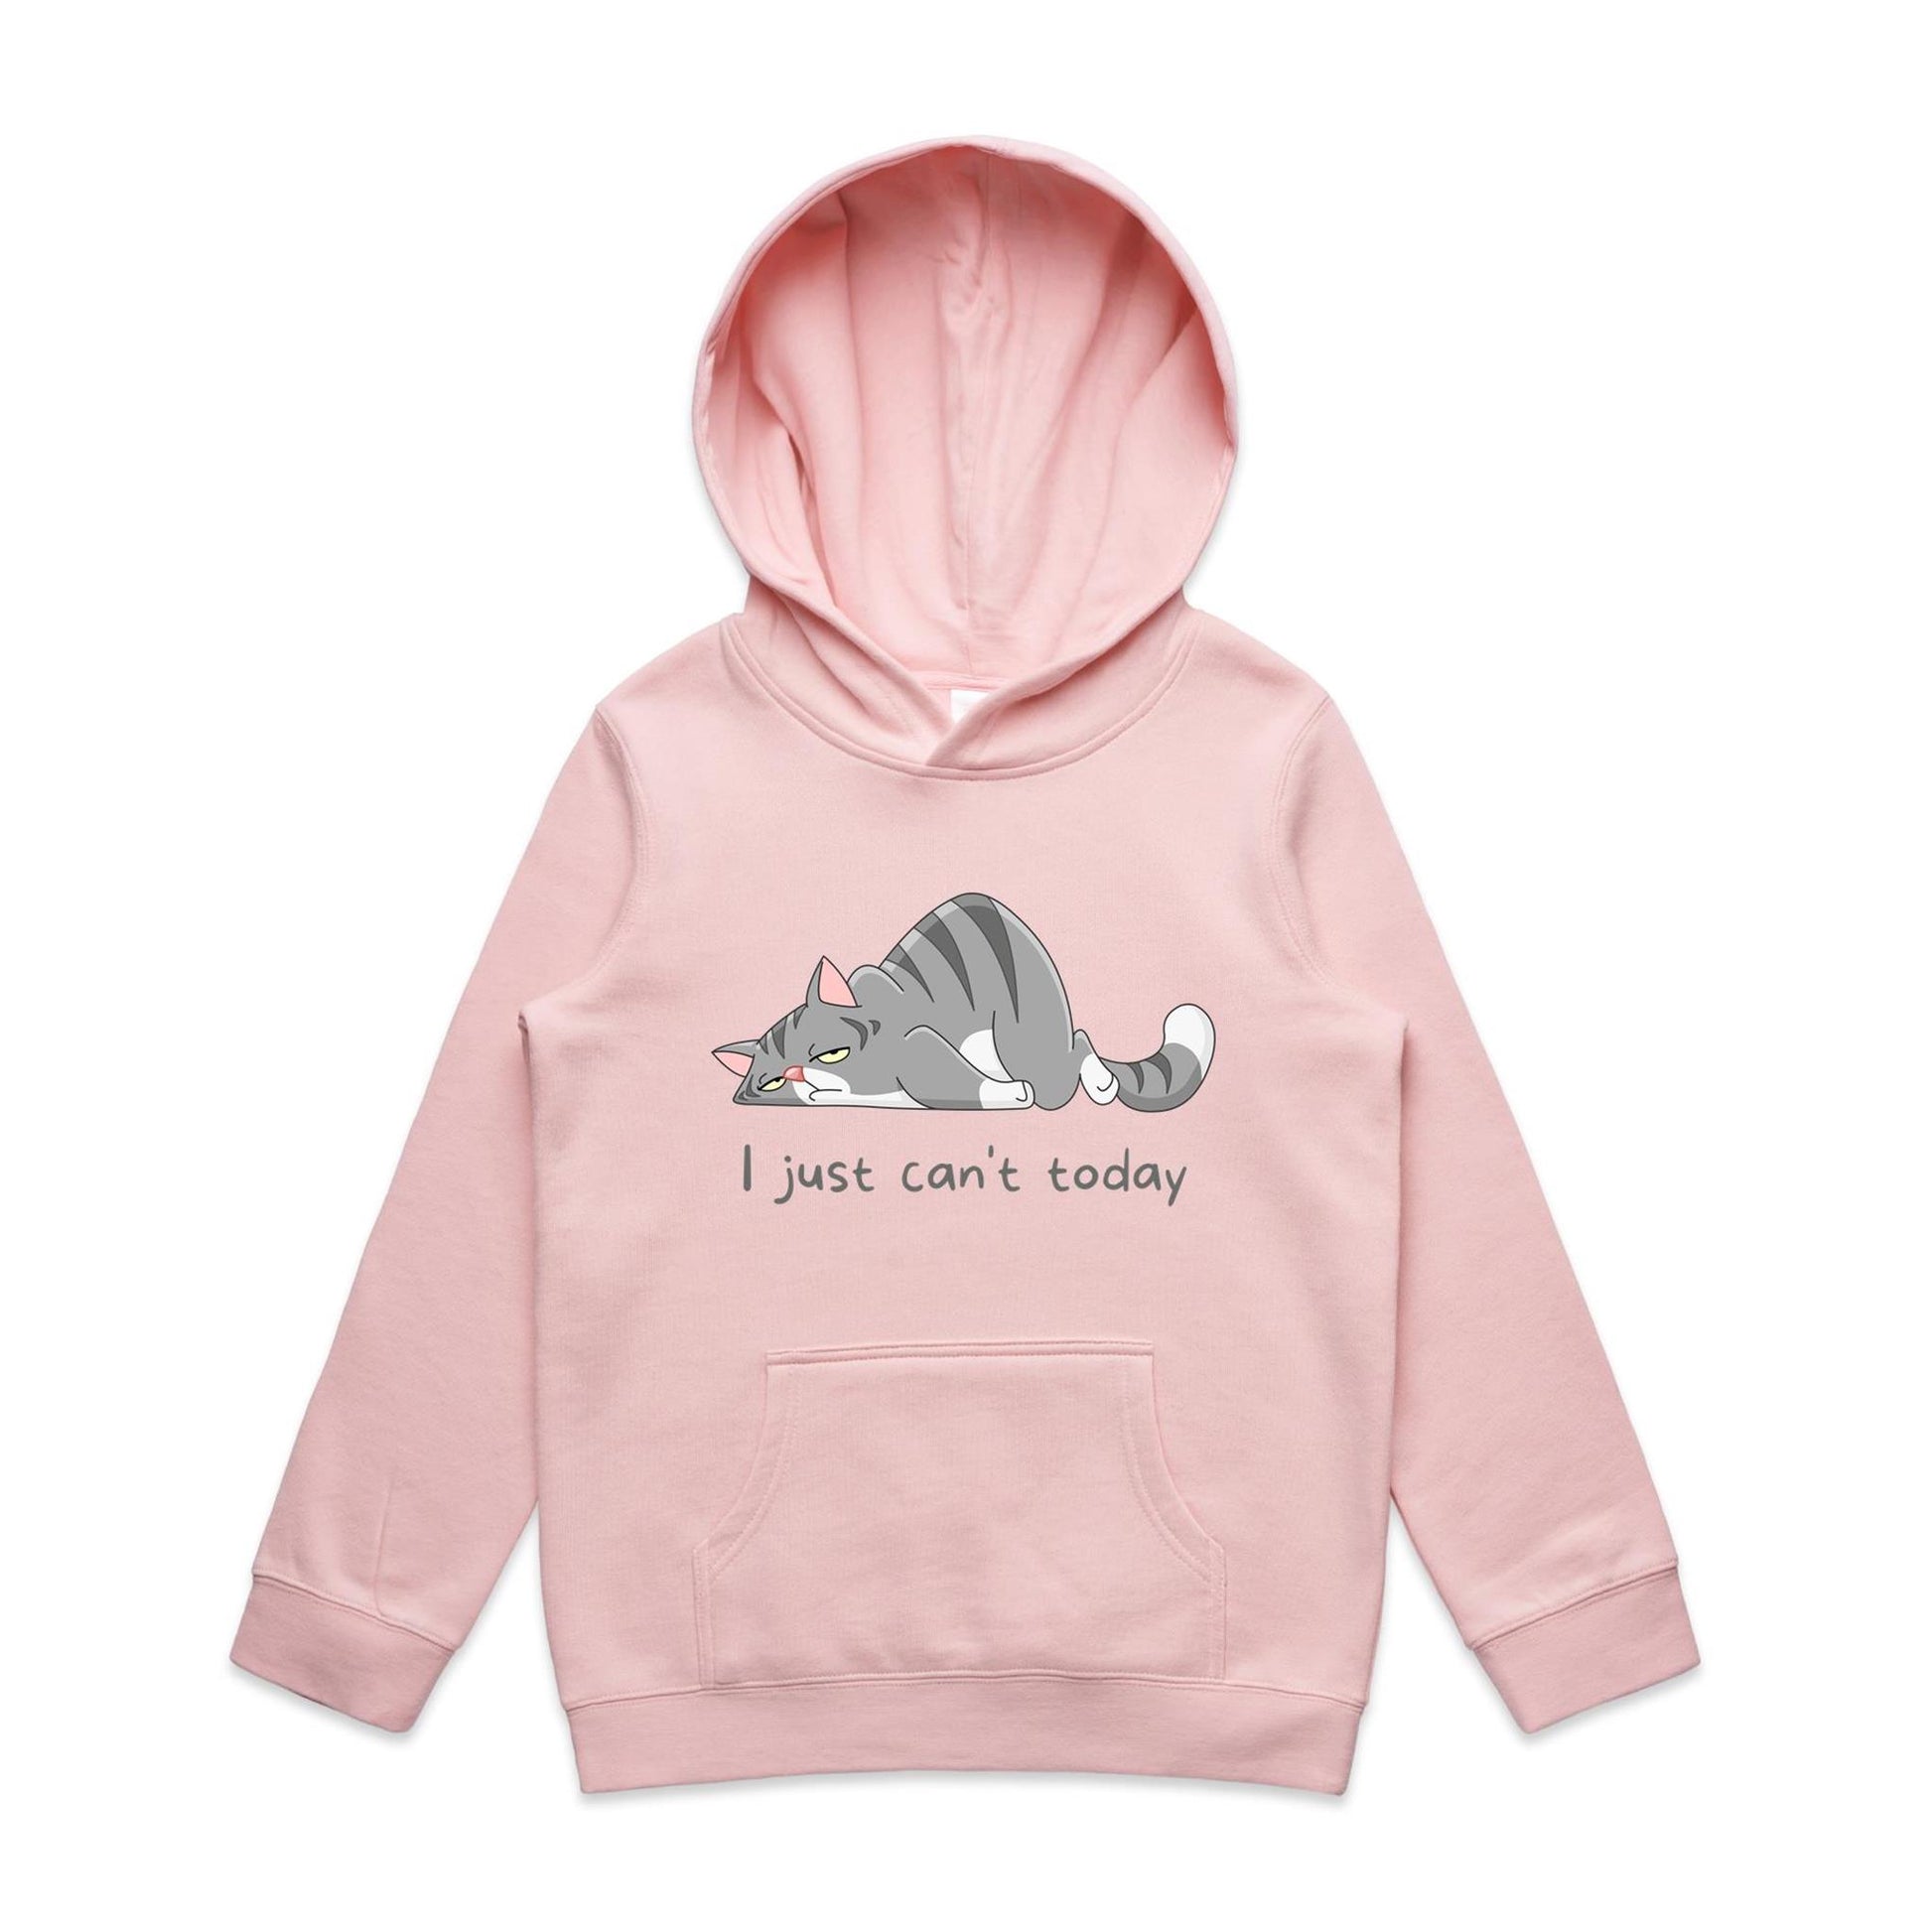 Cat, I Just Can't Today - Youth Supply Hood Pink Kids Hoodie animal